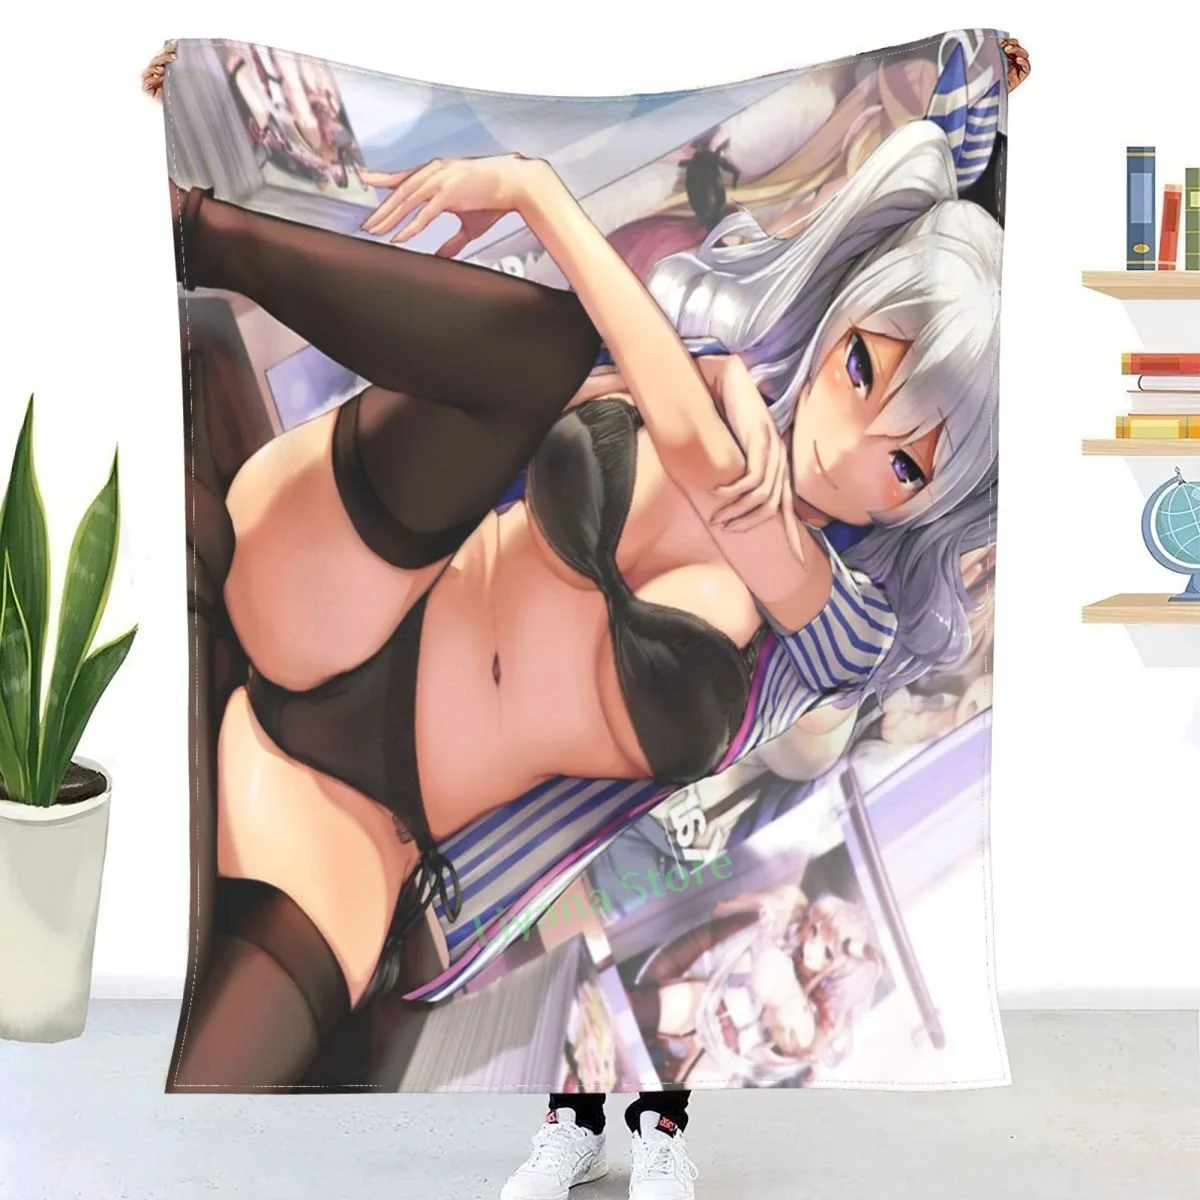 3d Hentai Girl Sex - Sexy Anime Girl In Beautiful Lingerie Throw Blanket 3d Printed Sofa Bedroom  Decorative Blanket Children Adult Christmas Gift - Blanket - AliExpress